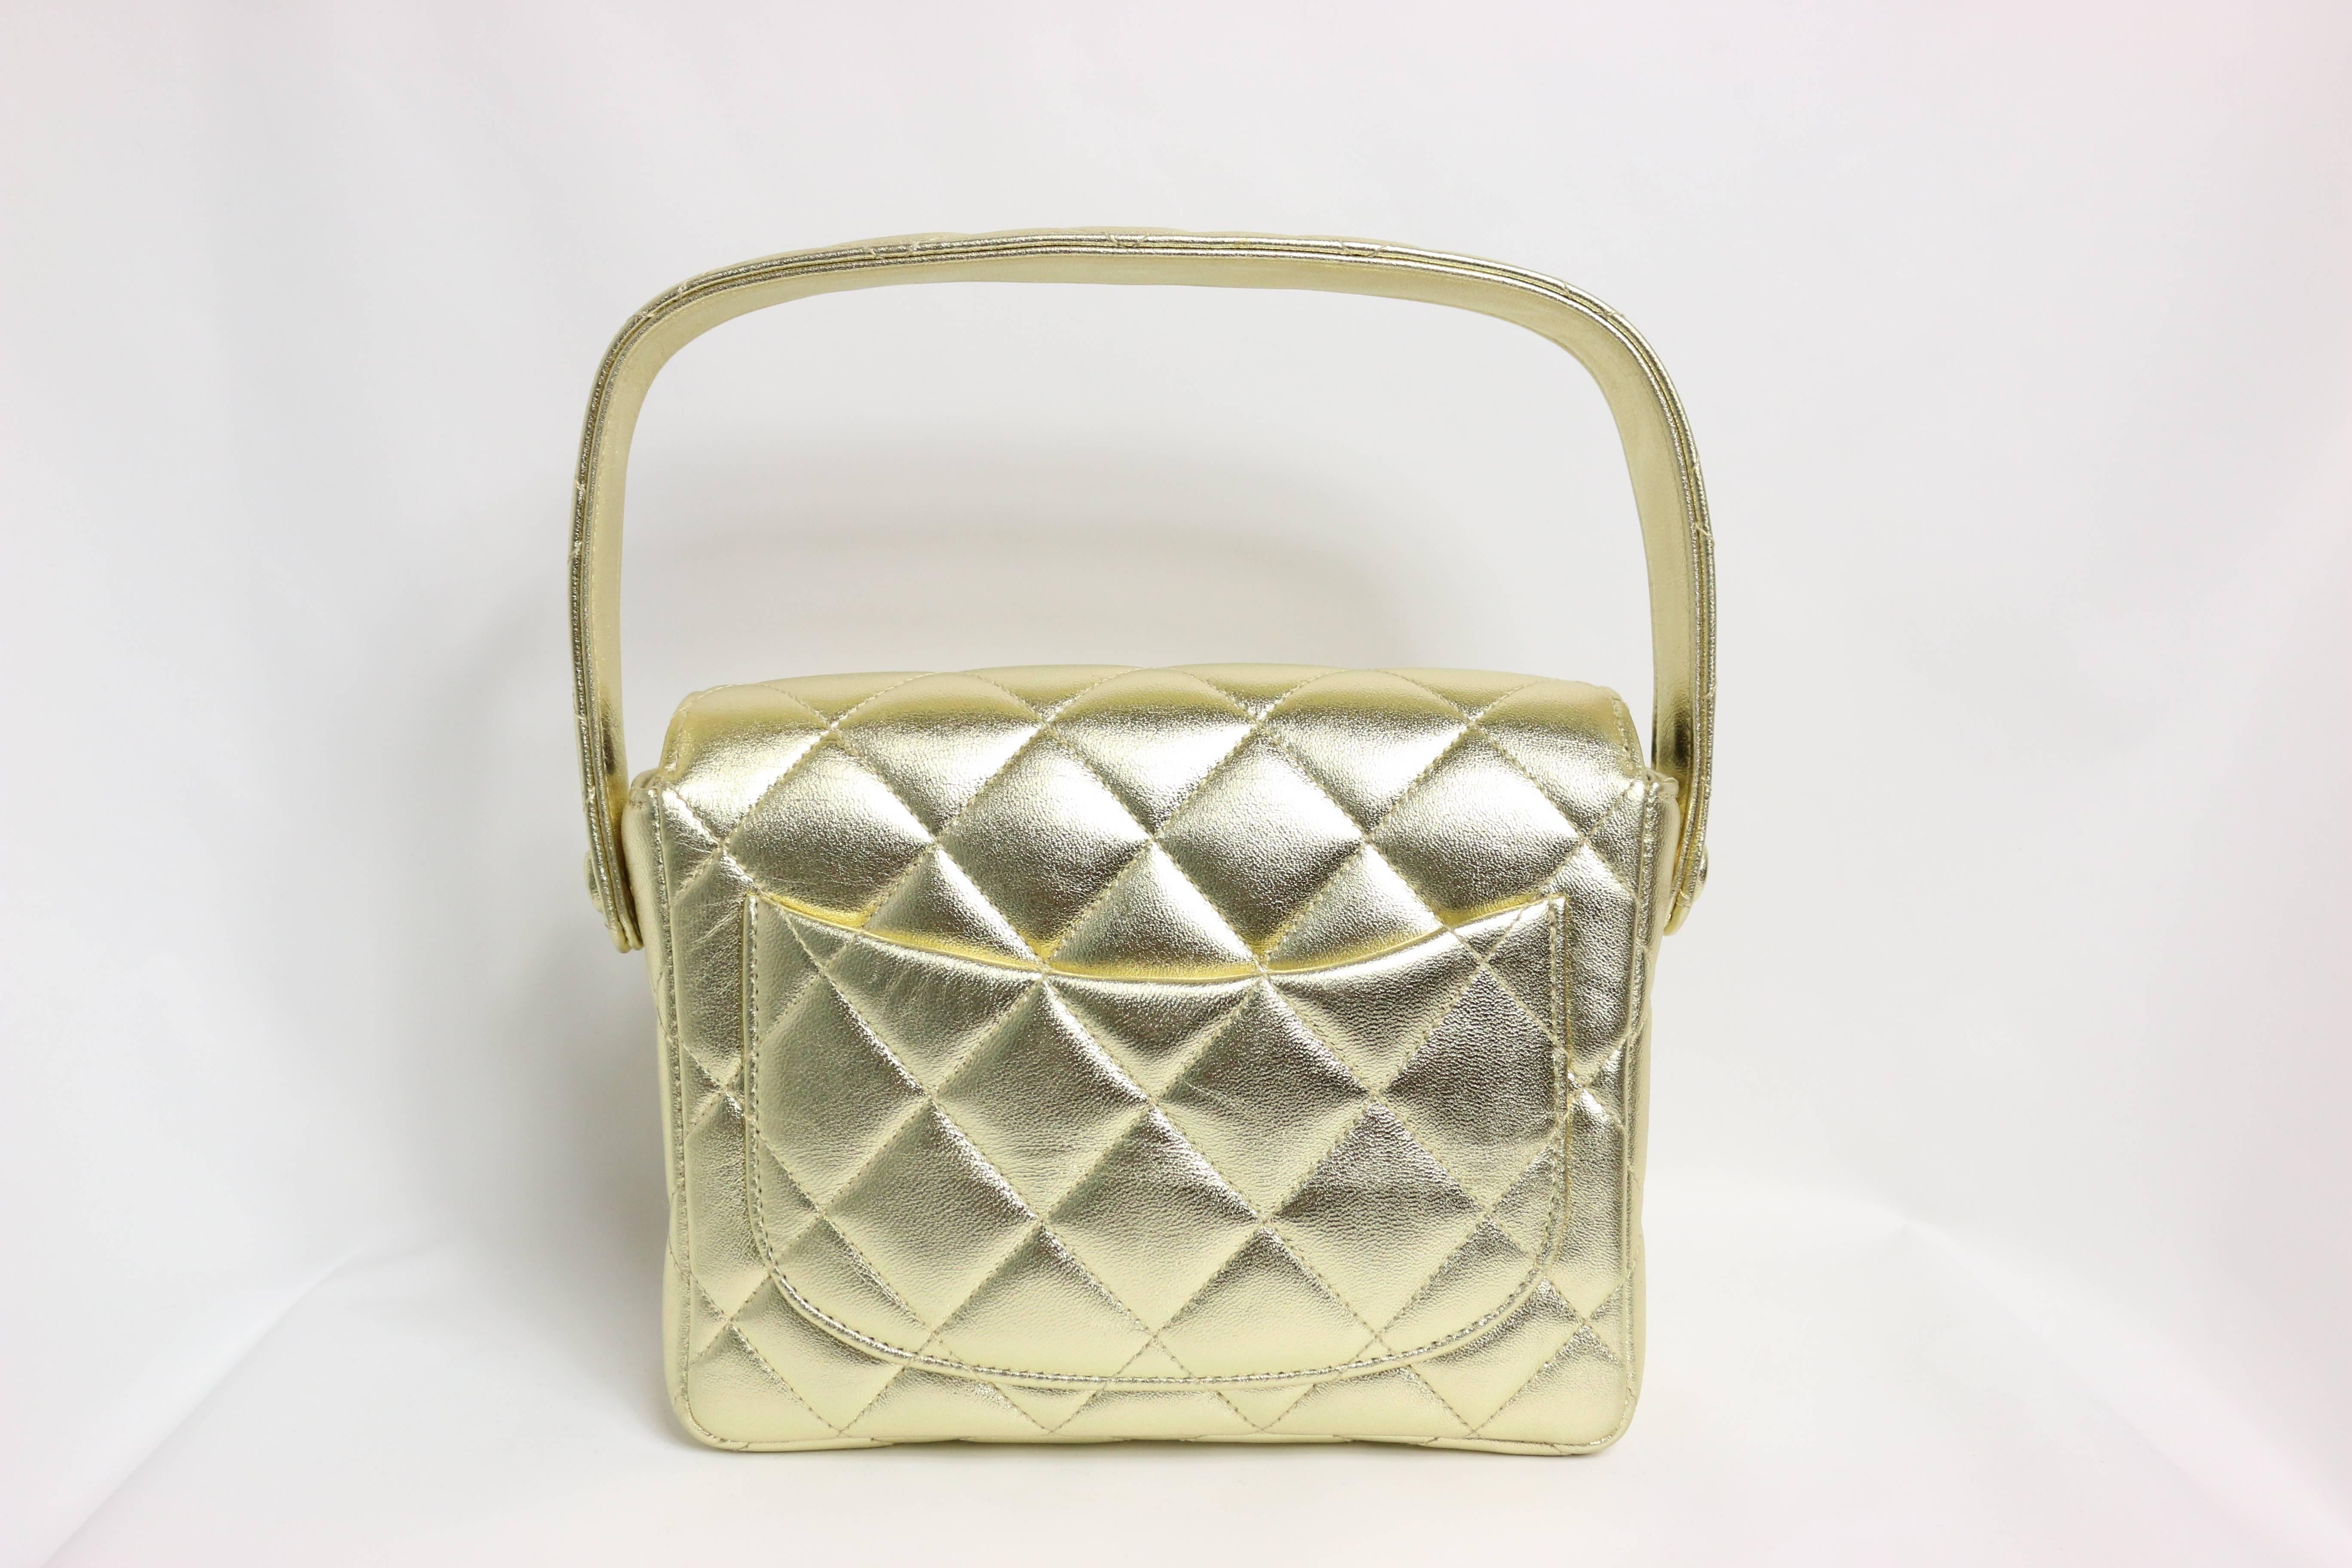 - Chanel gold metallic lambskin leather quilted mini flap handbag from 1996 to 1997 collection. 

- Long: 17cm I Height(with strap): 19cm I Width: 6cm. 

- Include: Dust bag, Authenticity Card. 
